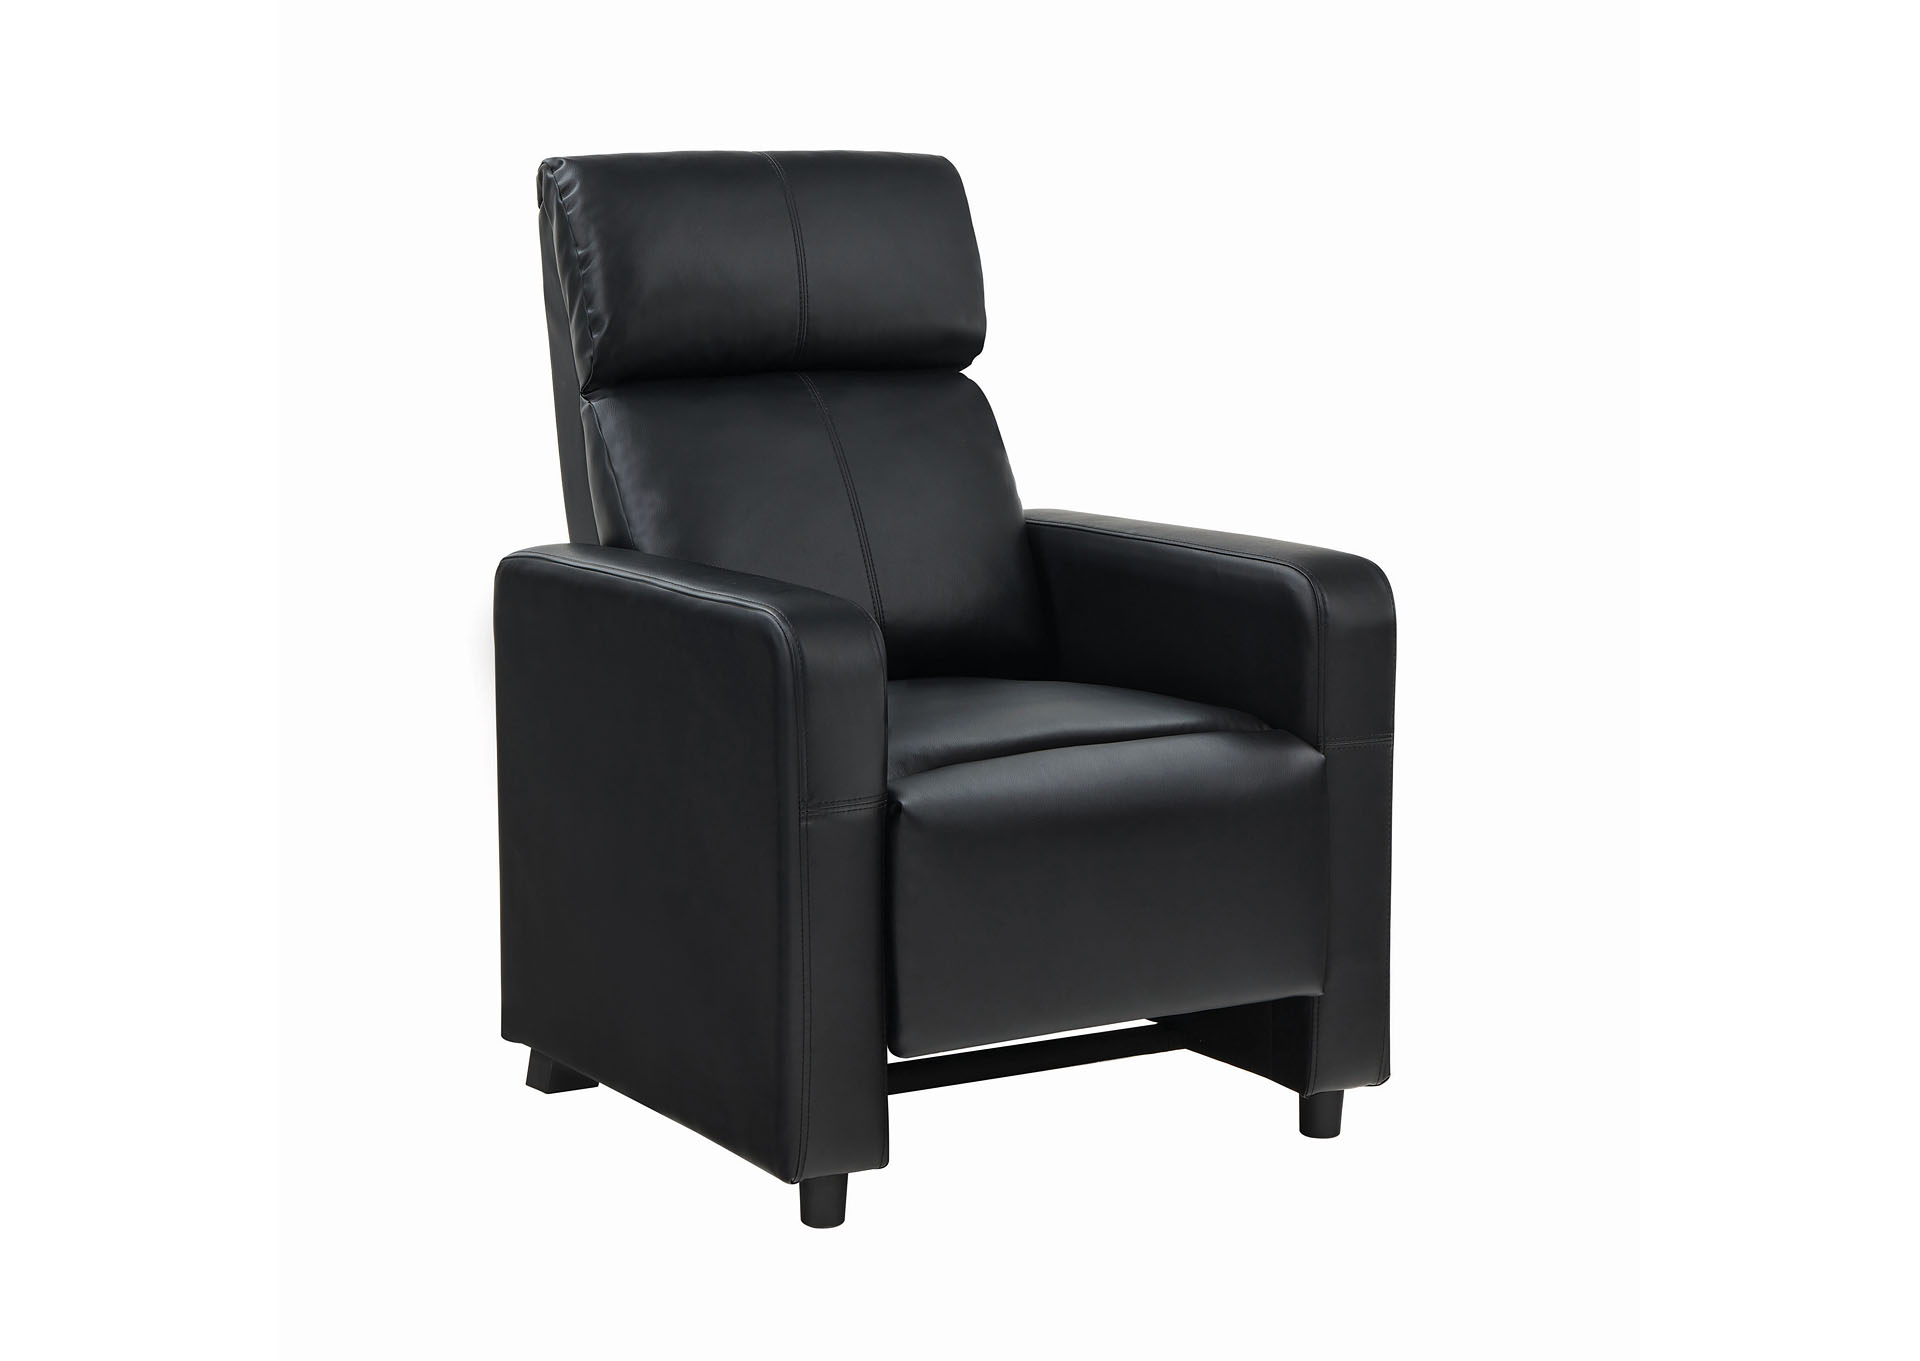 Black Toohey Home Theater Push-Back Recliner,Coaster Furniture